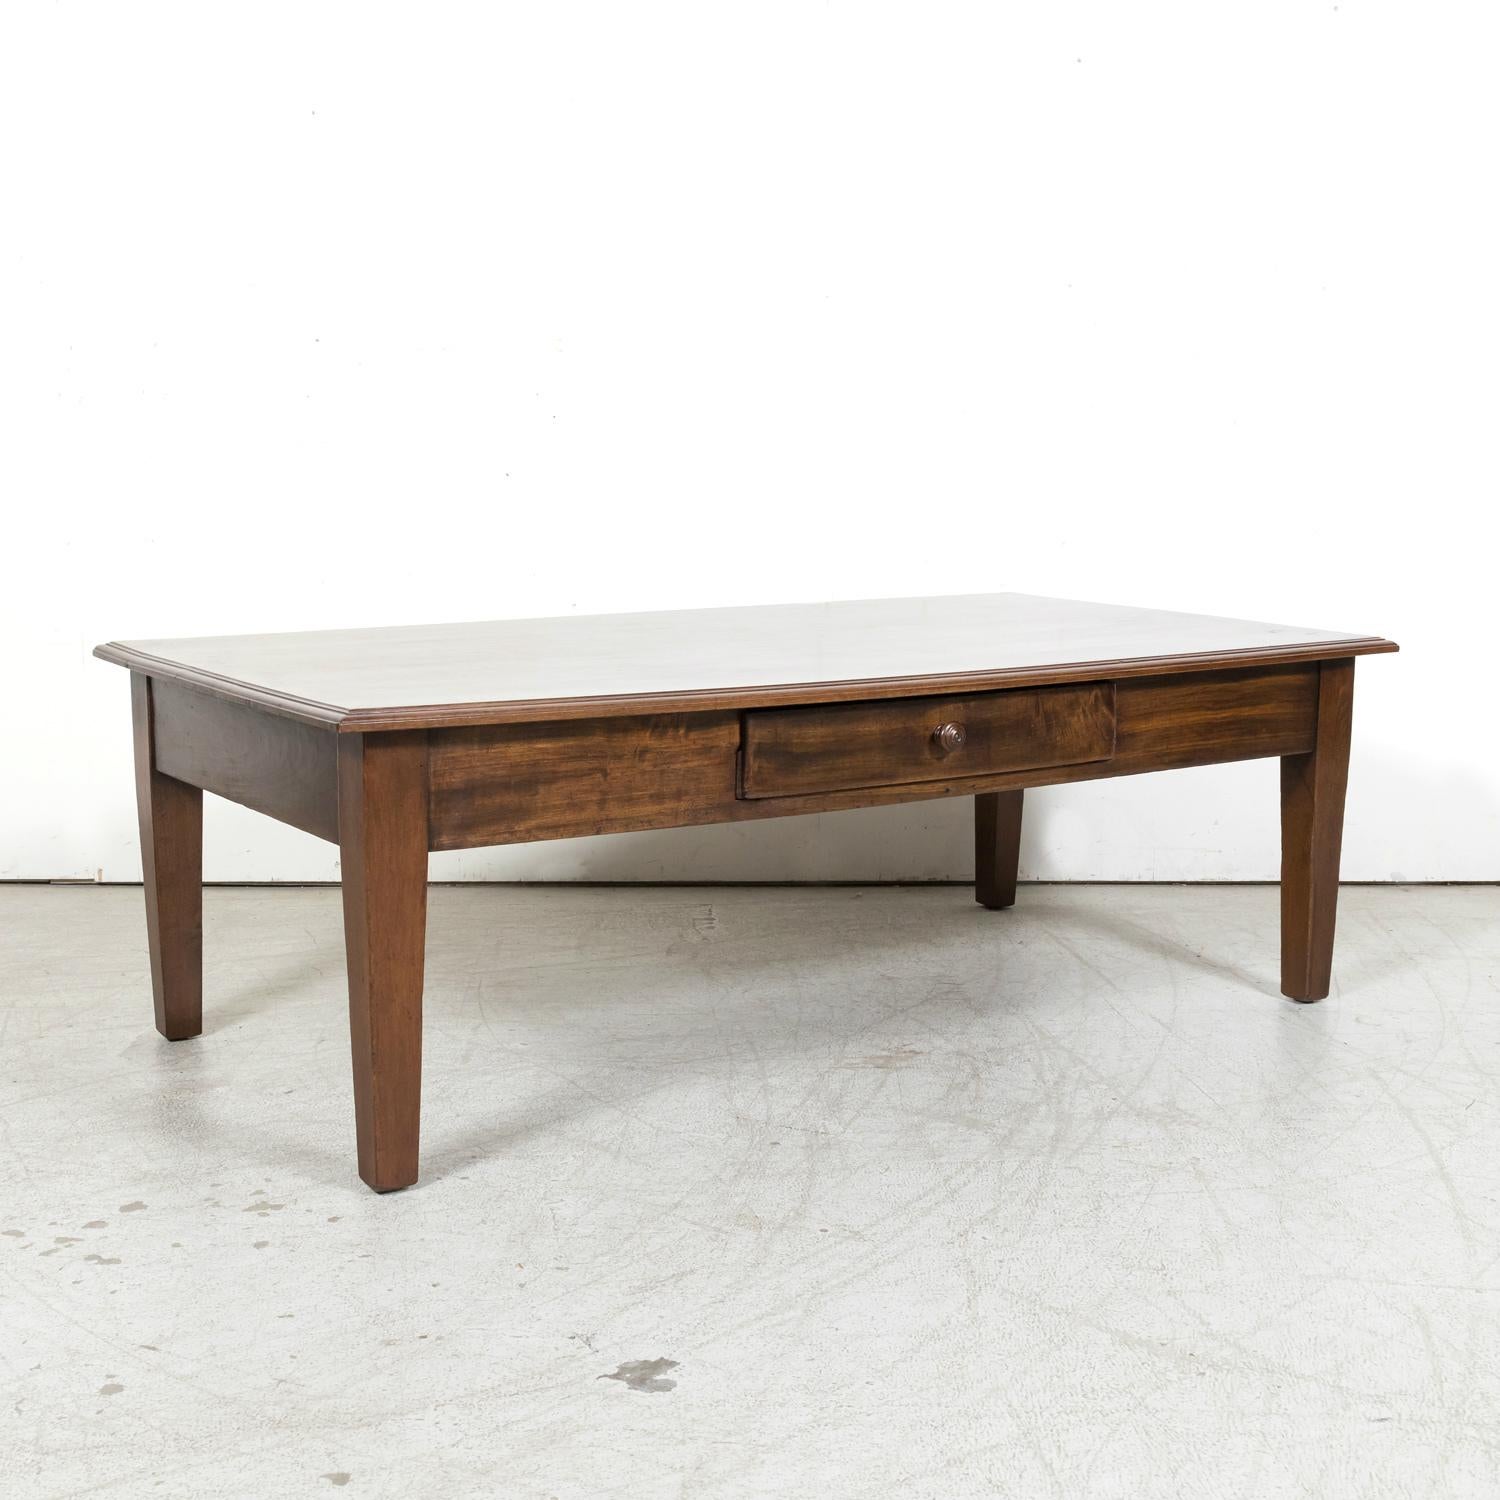 A large 19th century French Country coffee table handcrafted of solid walnut in the beautiful hills known as Les Alpes Mancelles in the Normandy region, circa 1890s. Having a rich patina and distinctive grain pattern, this rustic table's design is